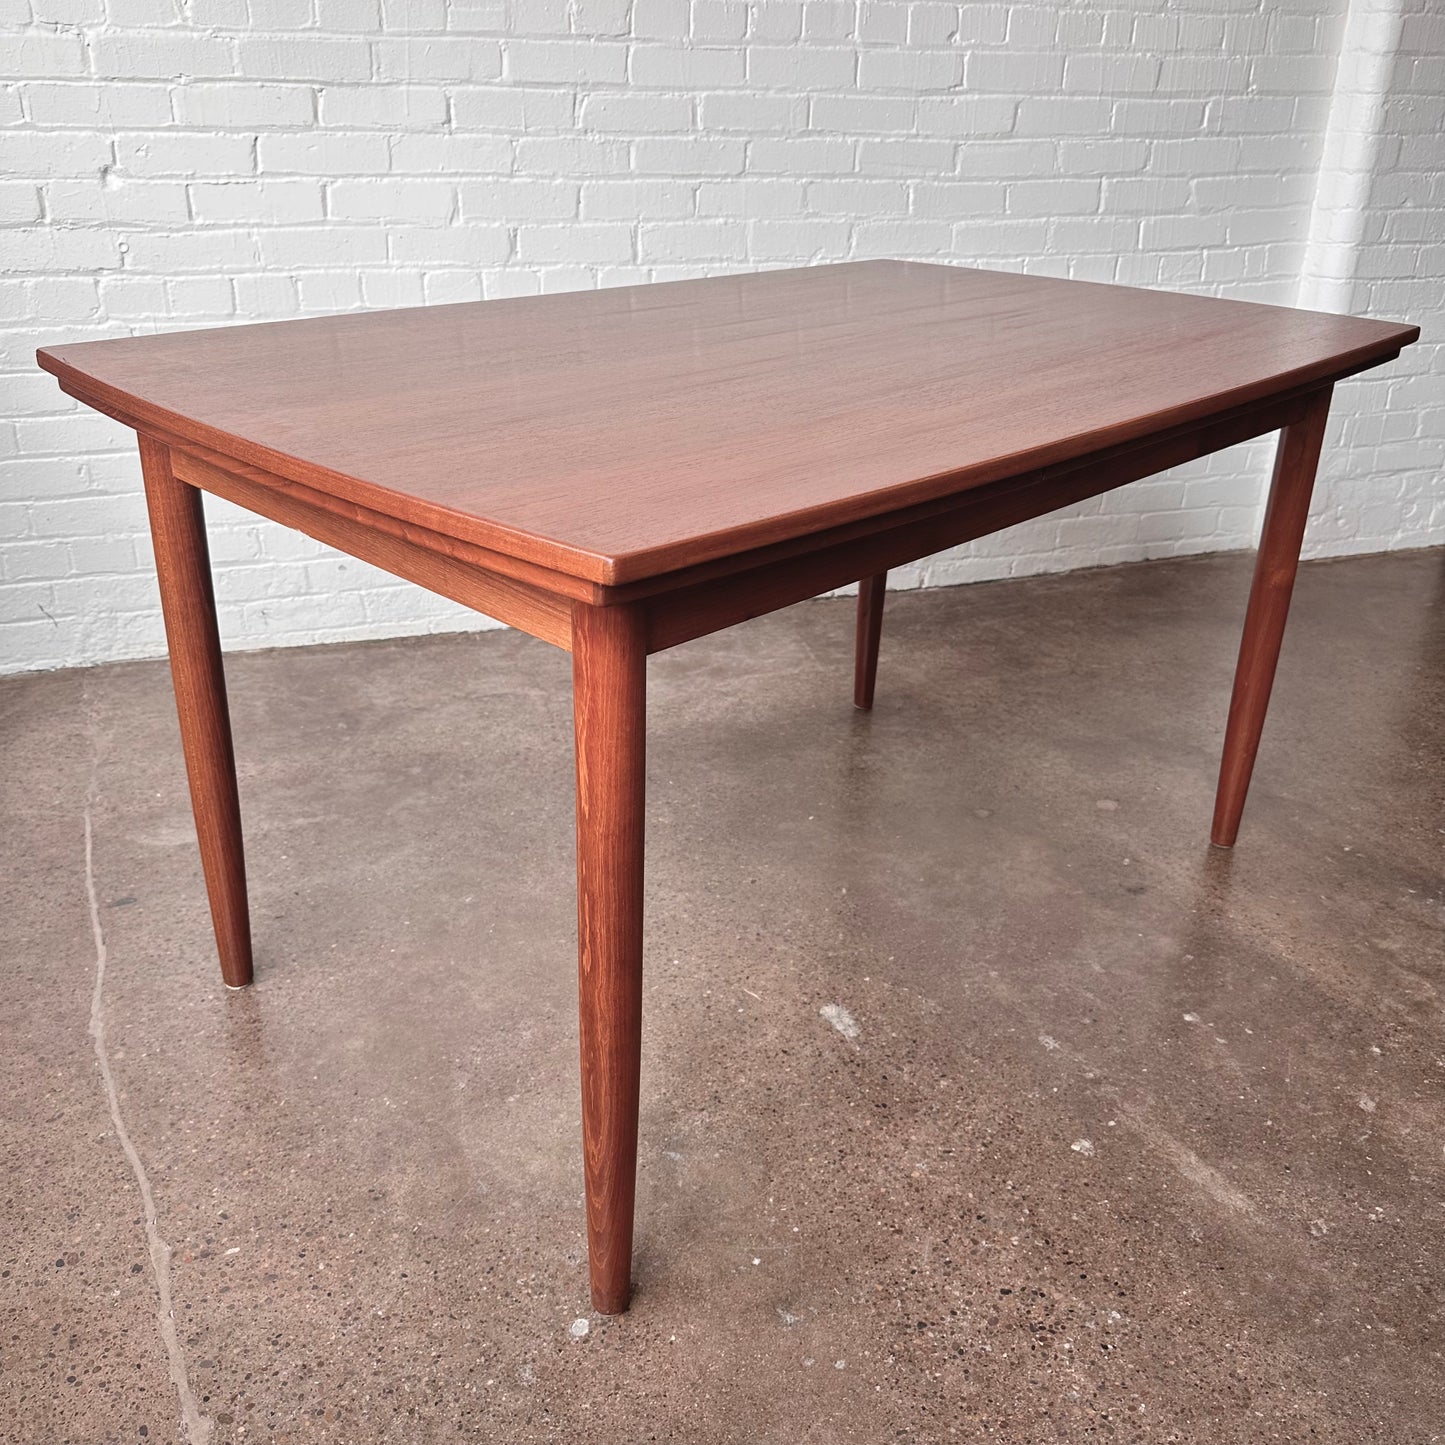 DANISH TEAK BOAT SHAPED DINING TABLE WITH DRAW LEAF